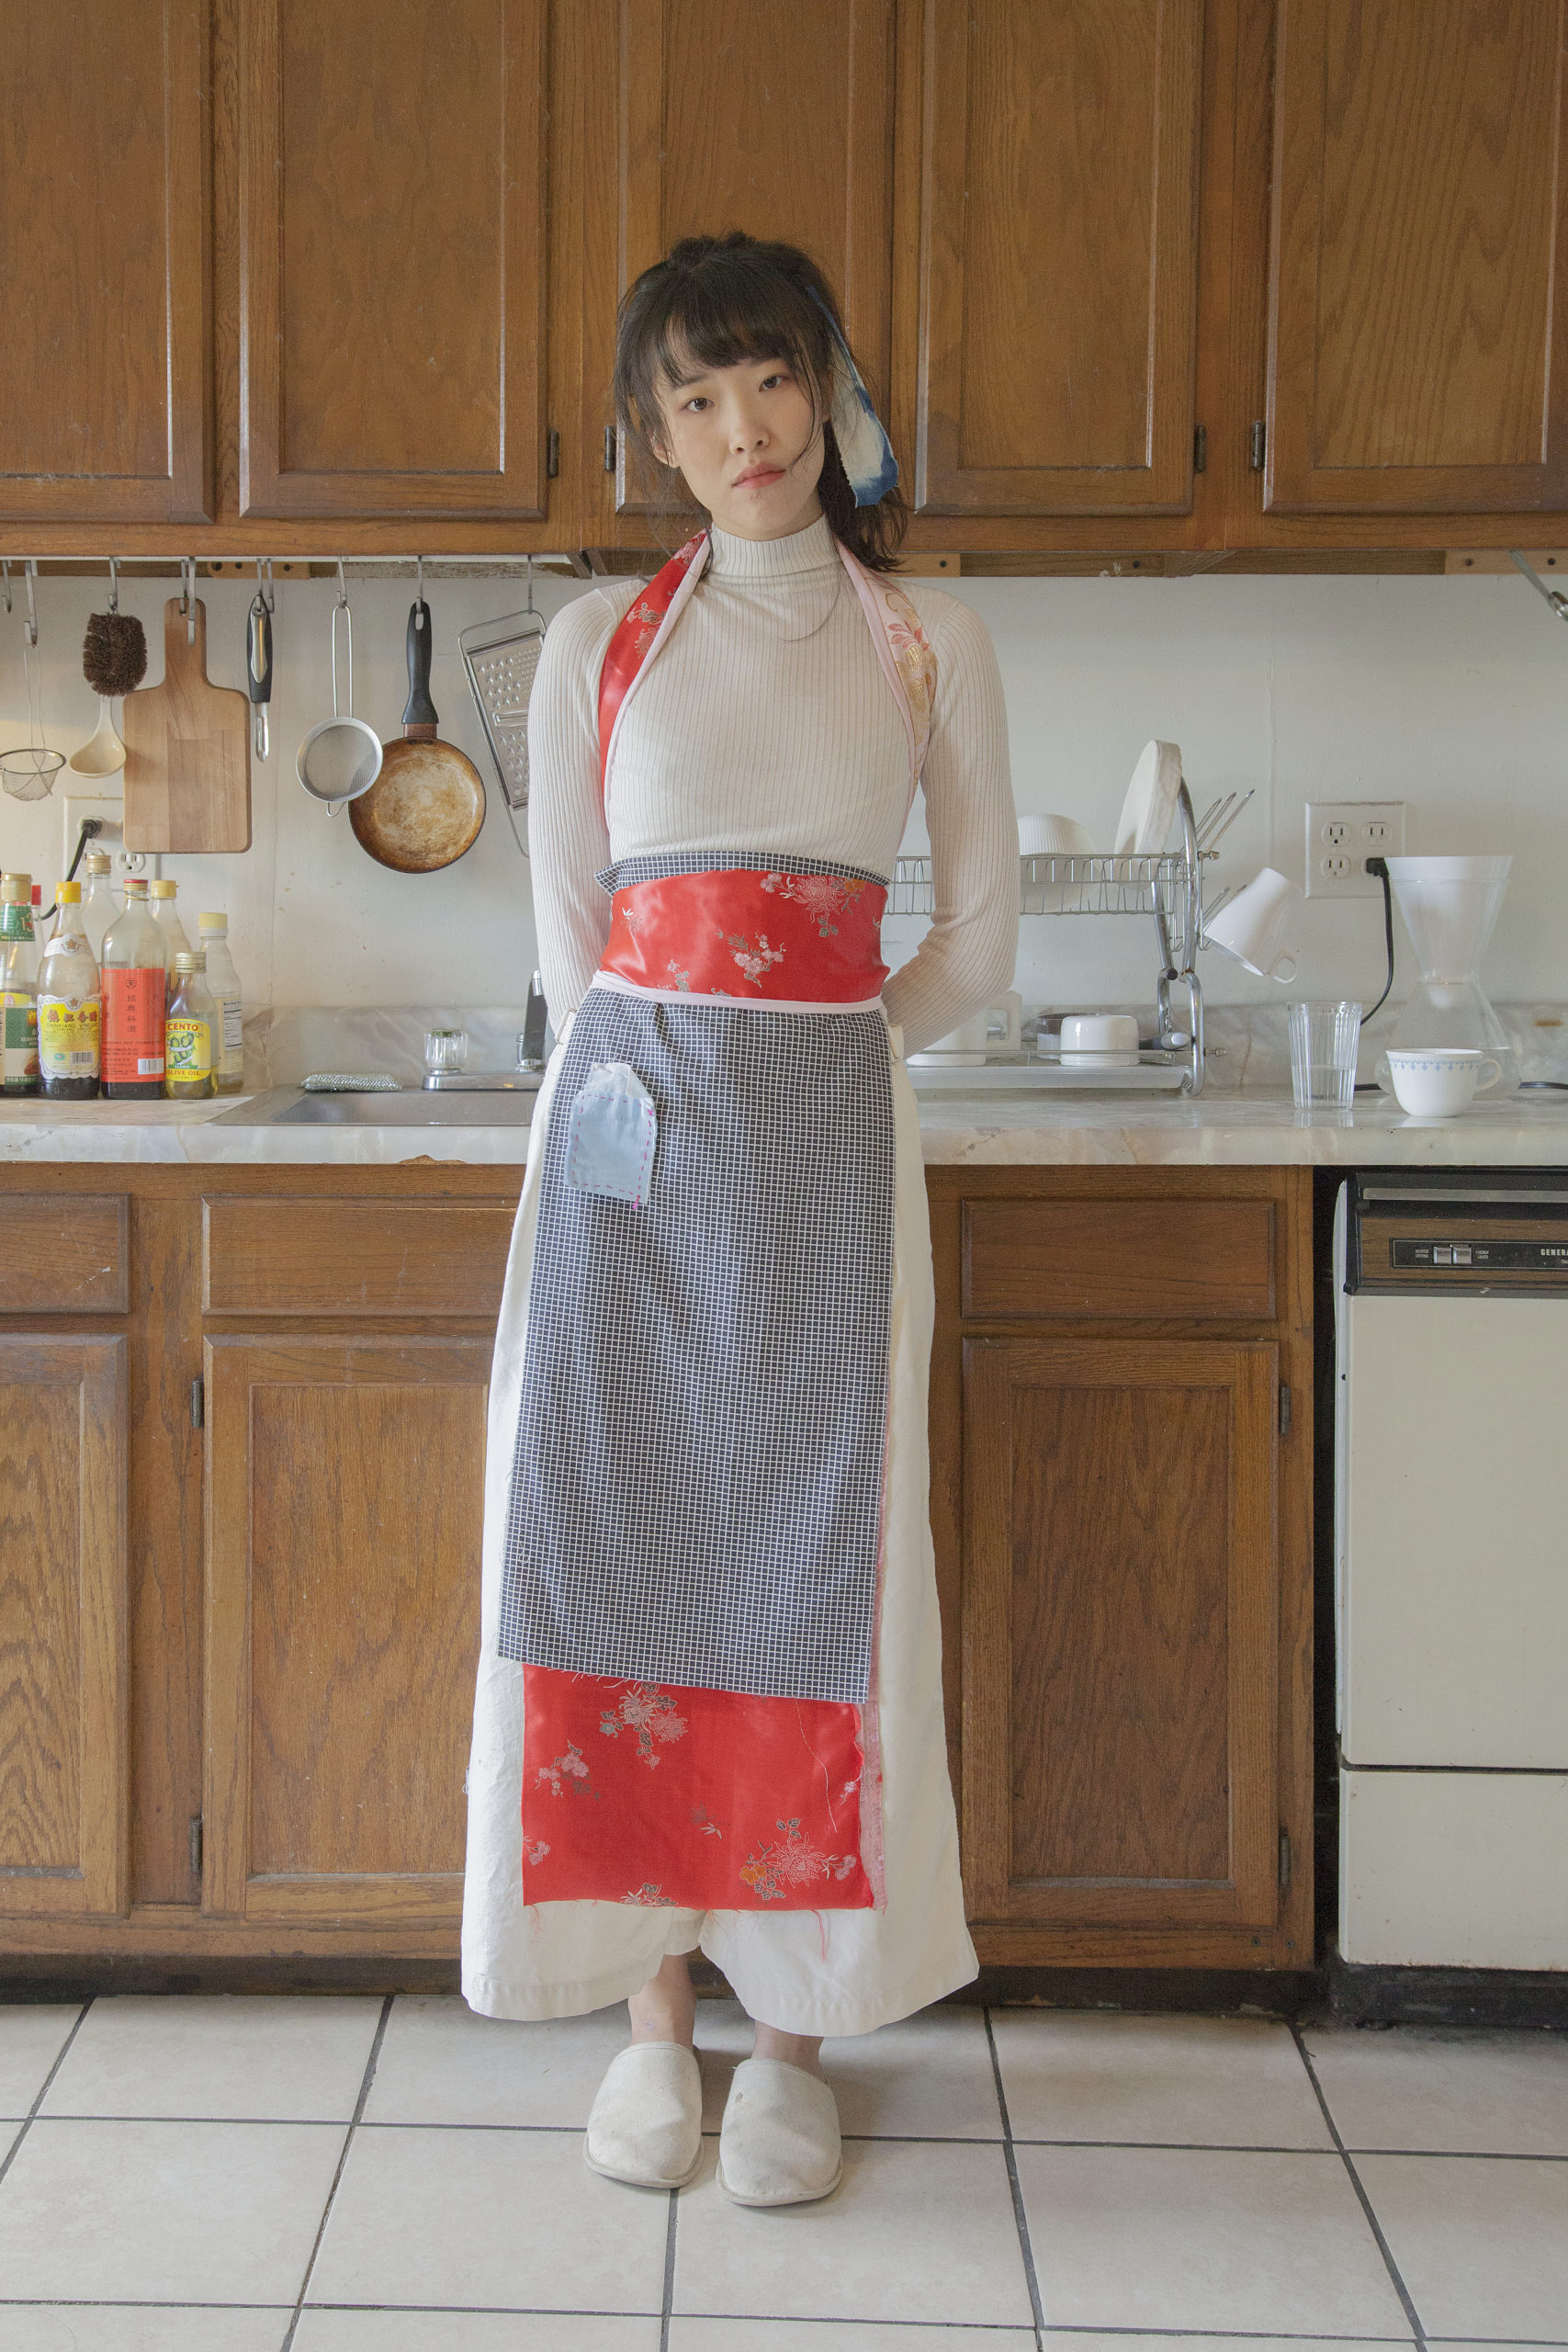 Chang Yuchen standing in a kitchen facing the camera wearing a beige top and pants with a peach-and-blue apron; the peach fabric is silky and the blue on the front part looks like cotton.